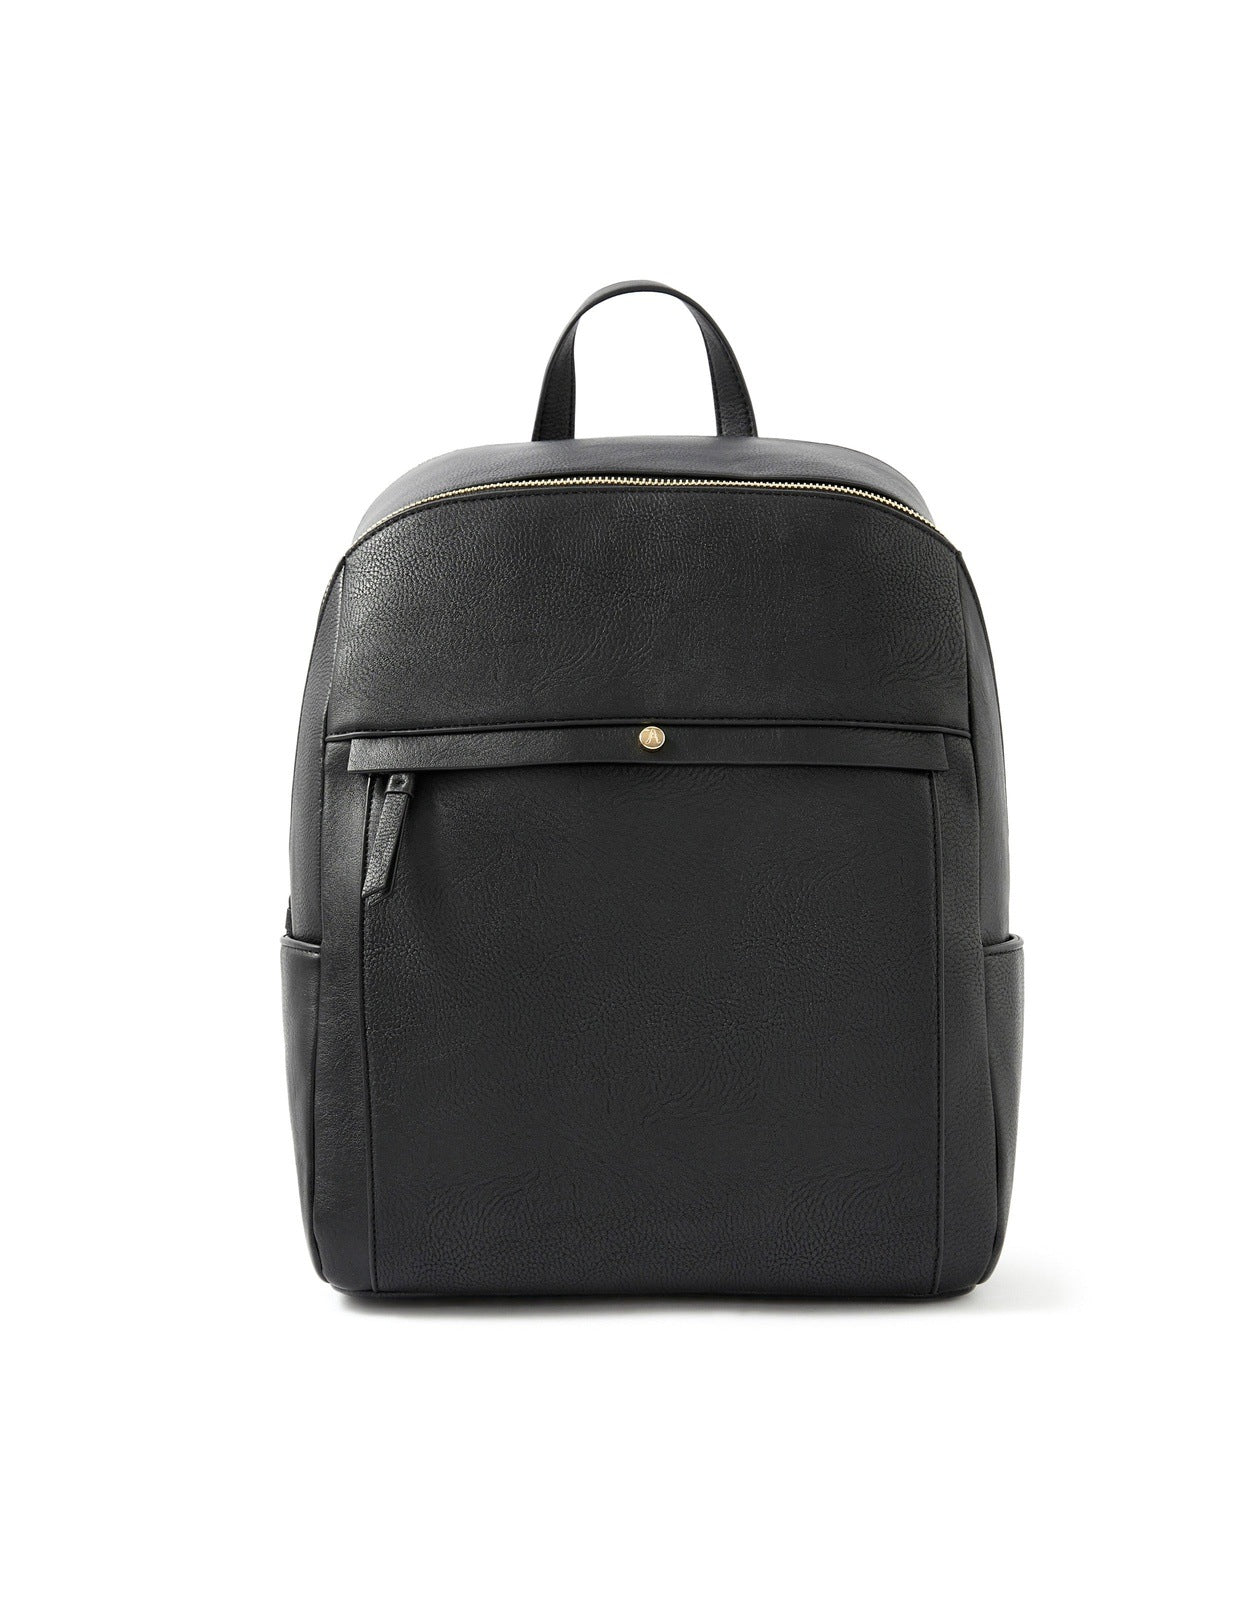 Mini Soft Touch Faux Leather Backpack — More than a backpack